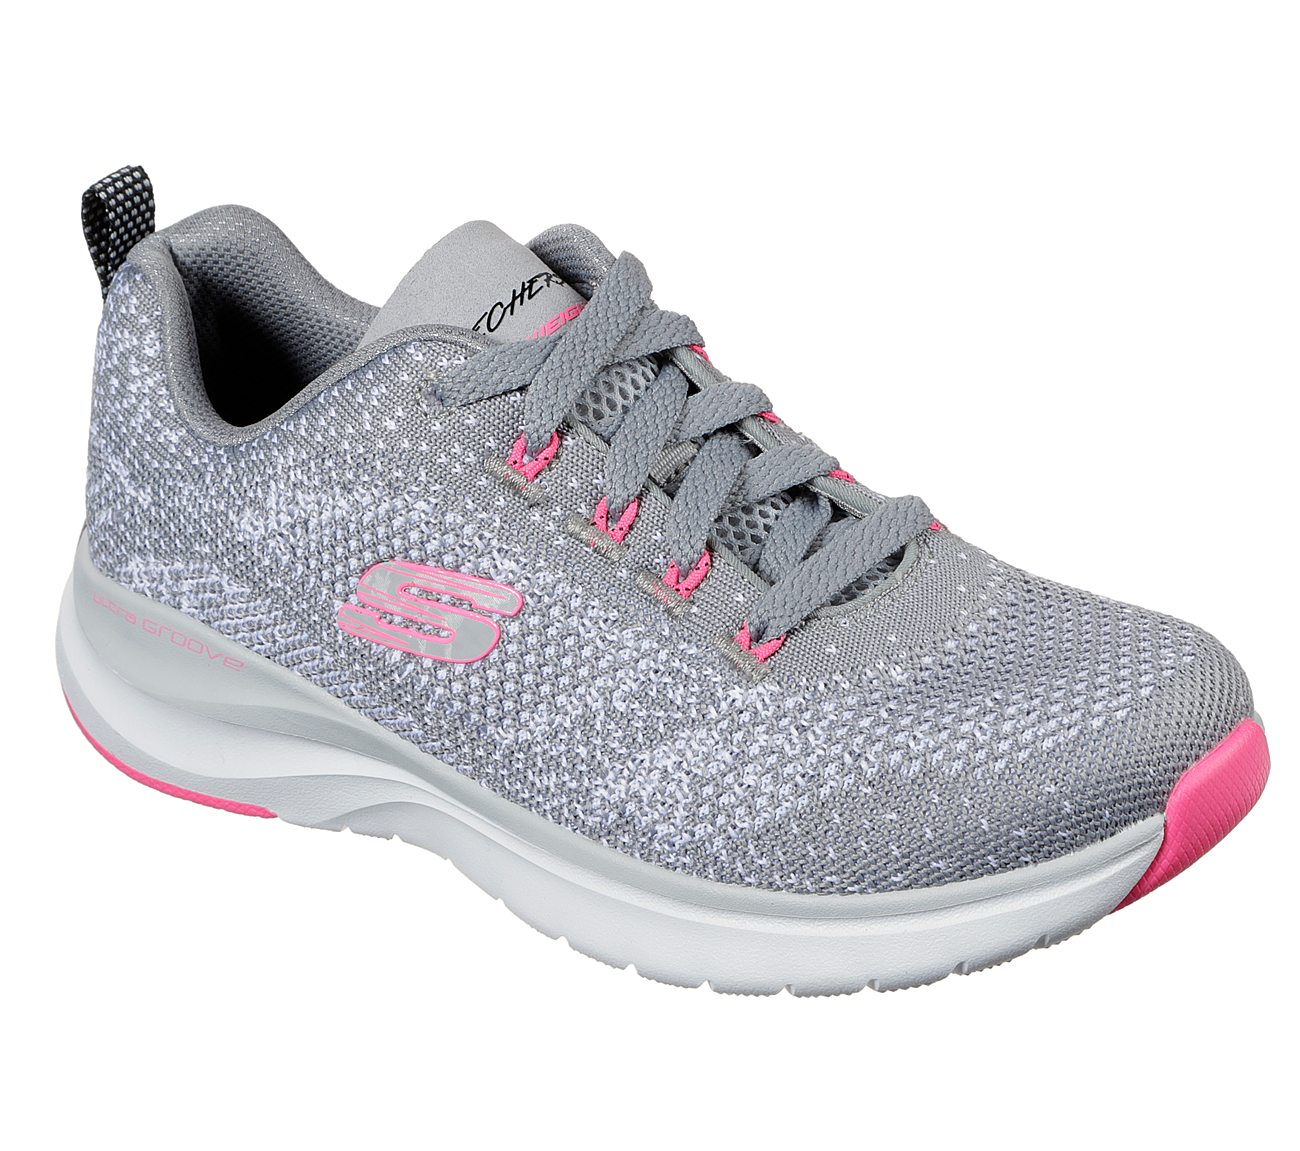 ULTRA GROOVE, GREY/HOT PINK Footwear Right View